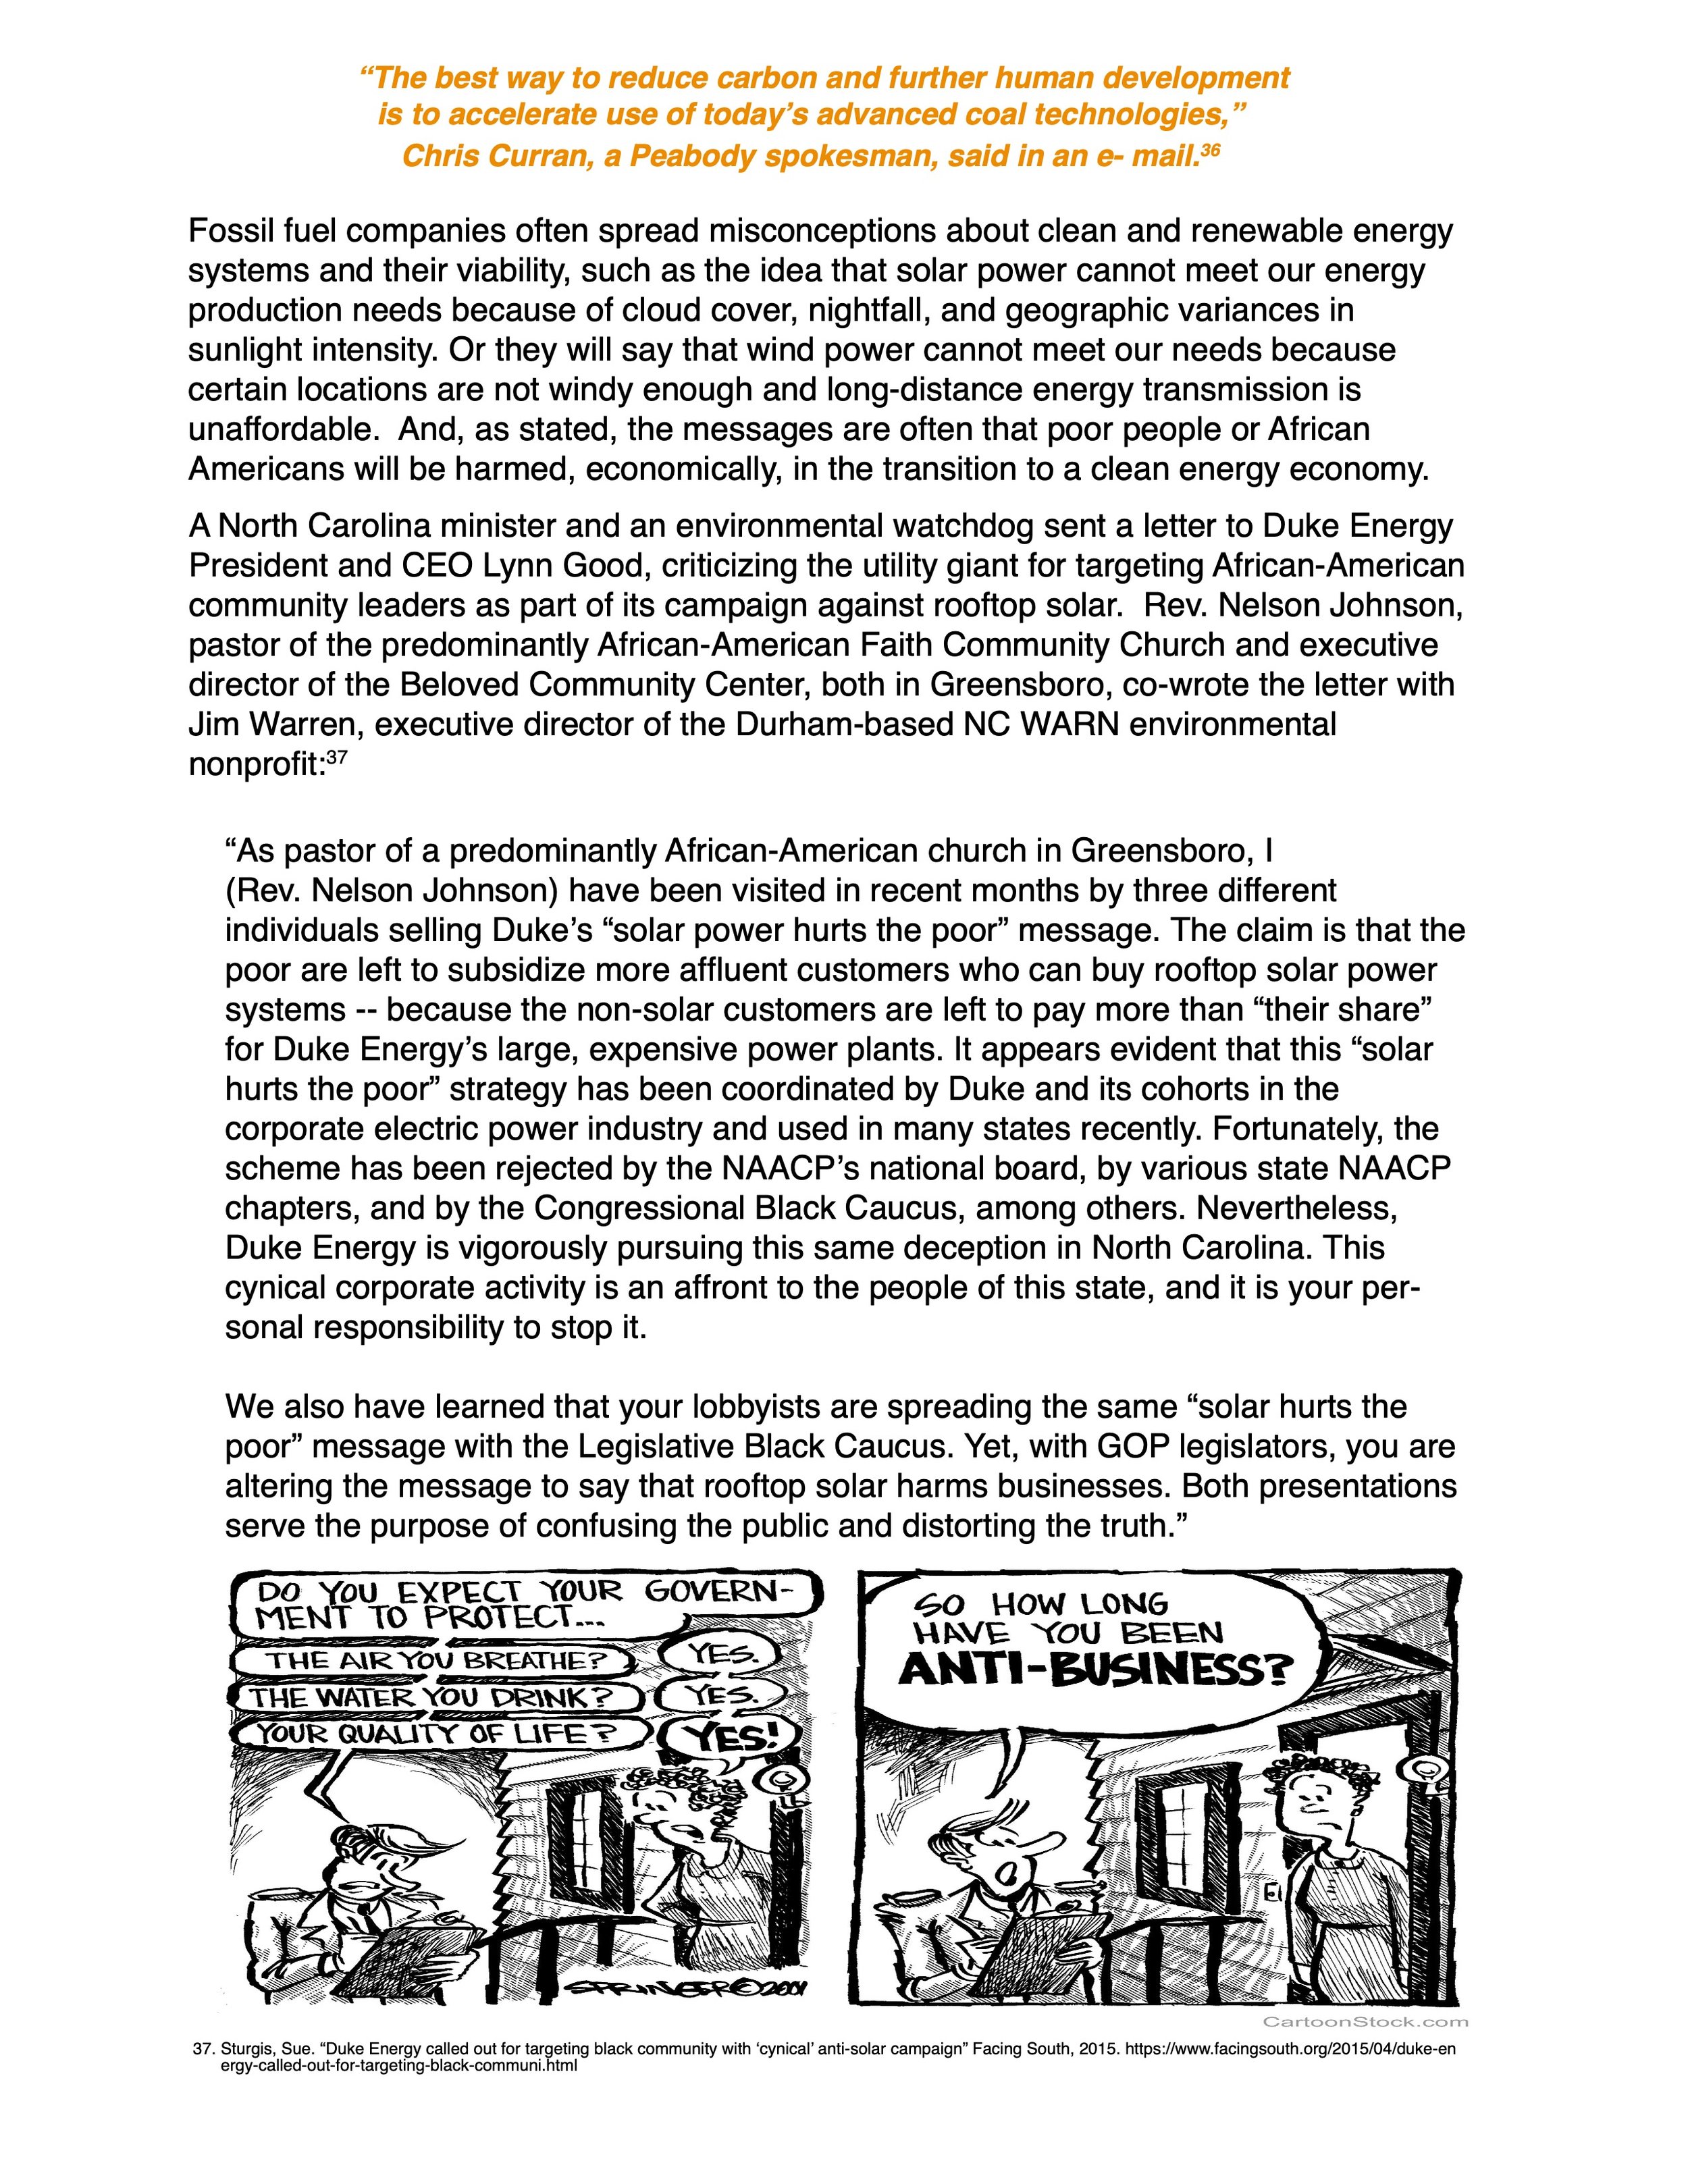 Fossil-Fueled-Foolery-An-Illustrated-Primer-on-the-Top-10-Manipulation-Tactics-of-the-Fossil-Fuel-Industry 15.jpeg